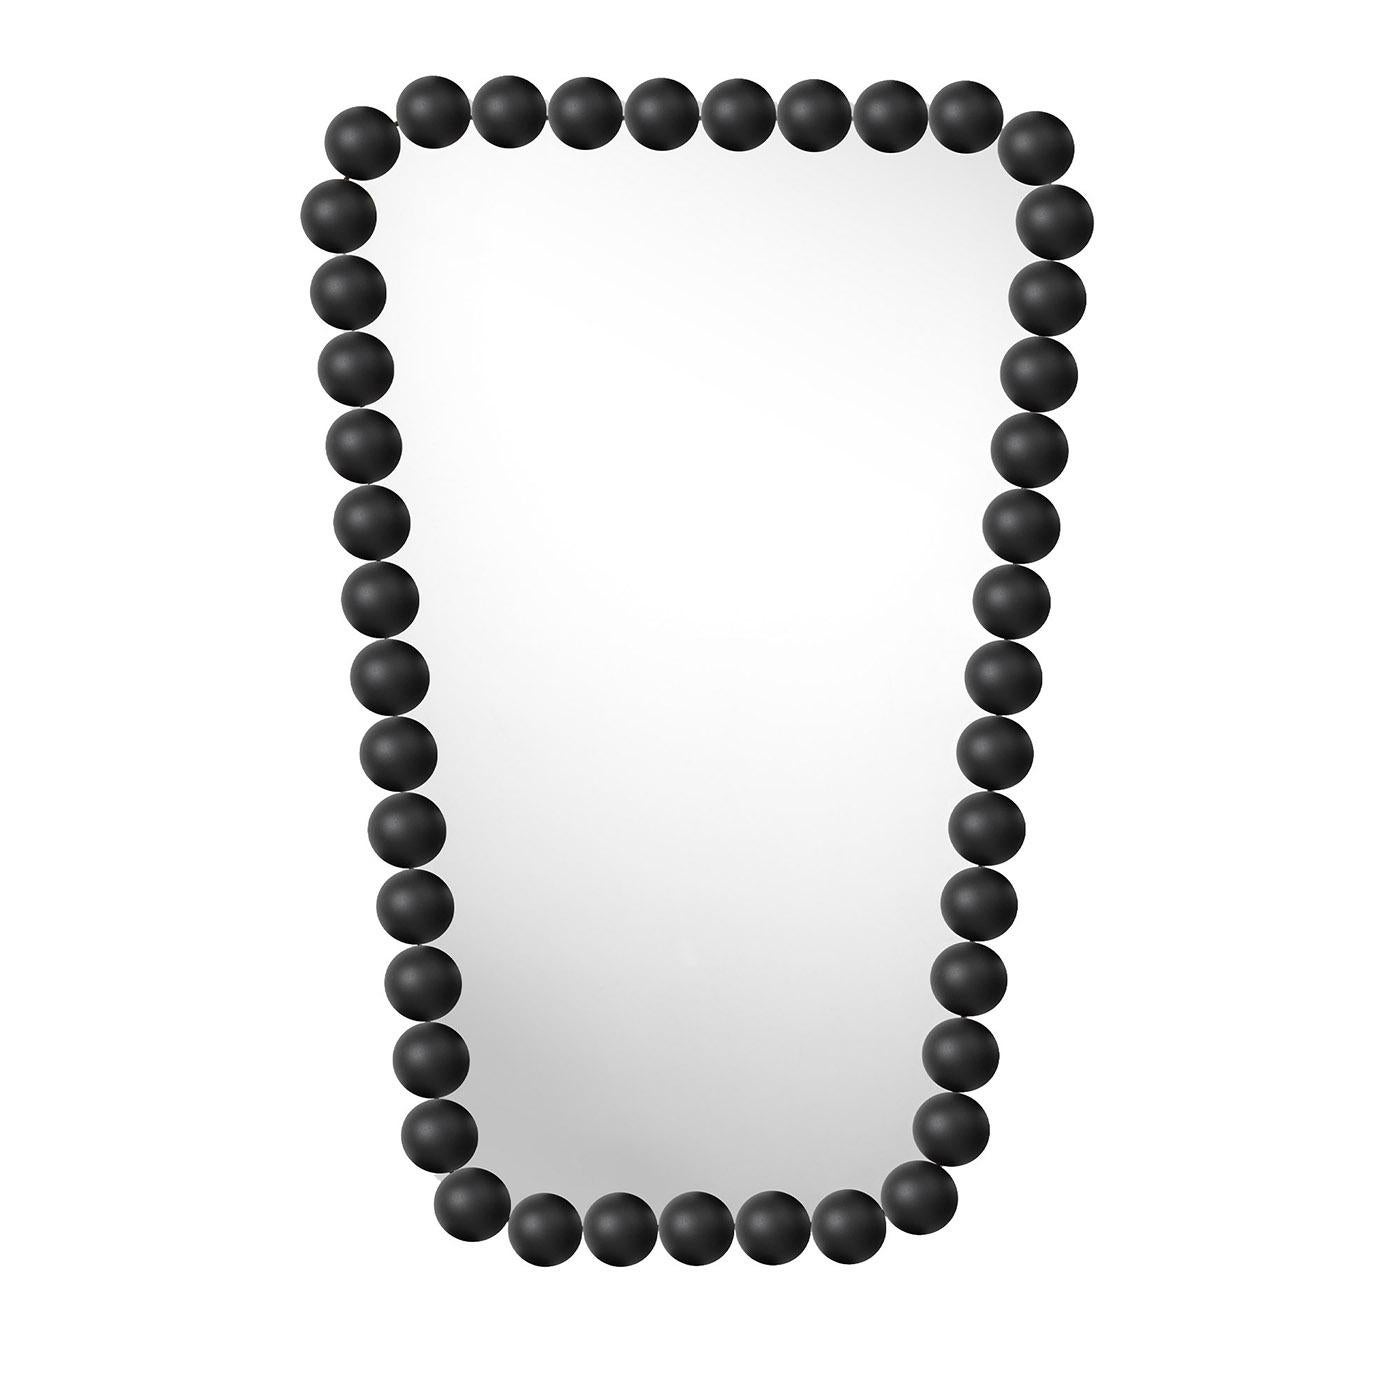 Reminiscent of a shaped, rigid necklace made of elegant beads, this wall mirror is a stylish design by Nika Zupanc. Its standout feature is its geometric inspiration, firstly revealed by the trapezoid shape and further emphasized by the frame, which